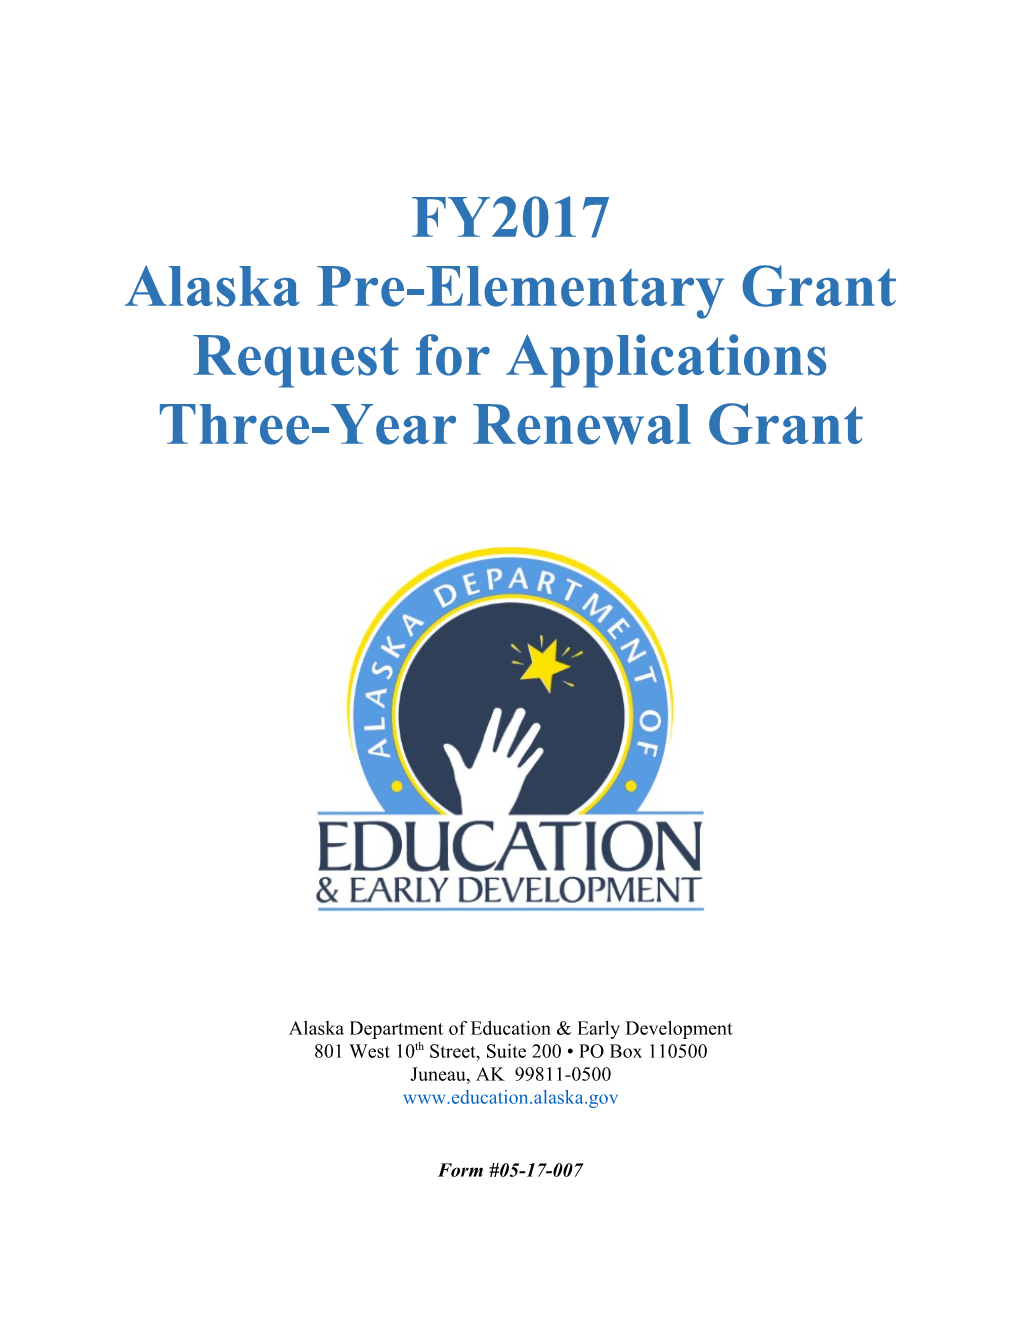 Alaska Pre-Elementary Grant Request for Applications